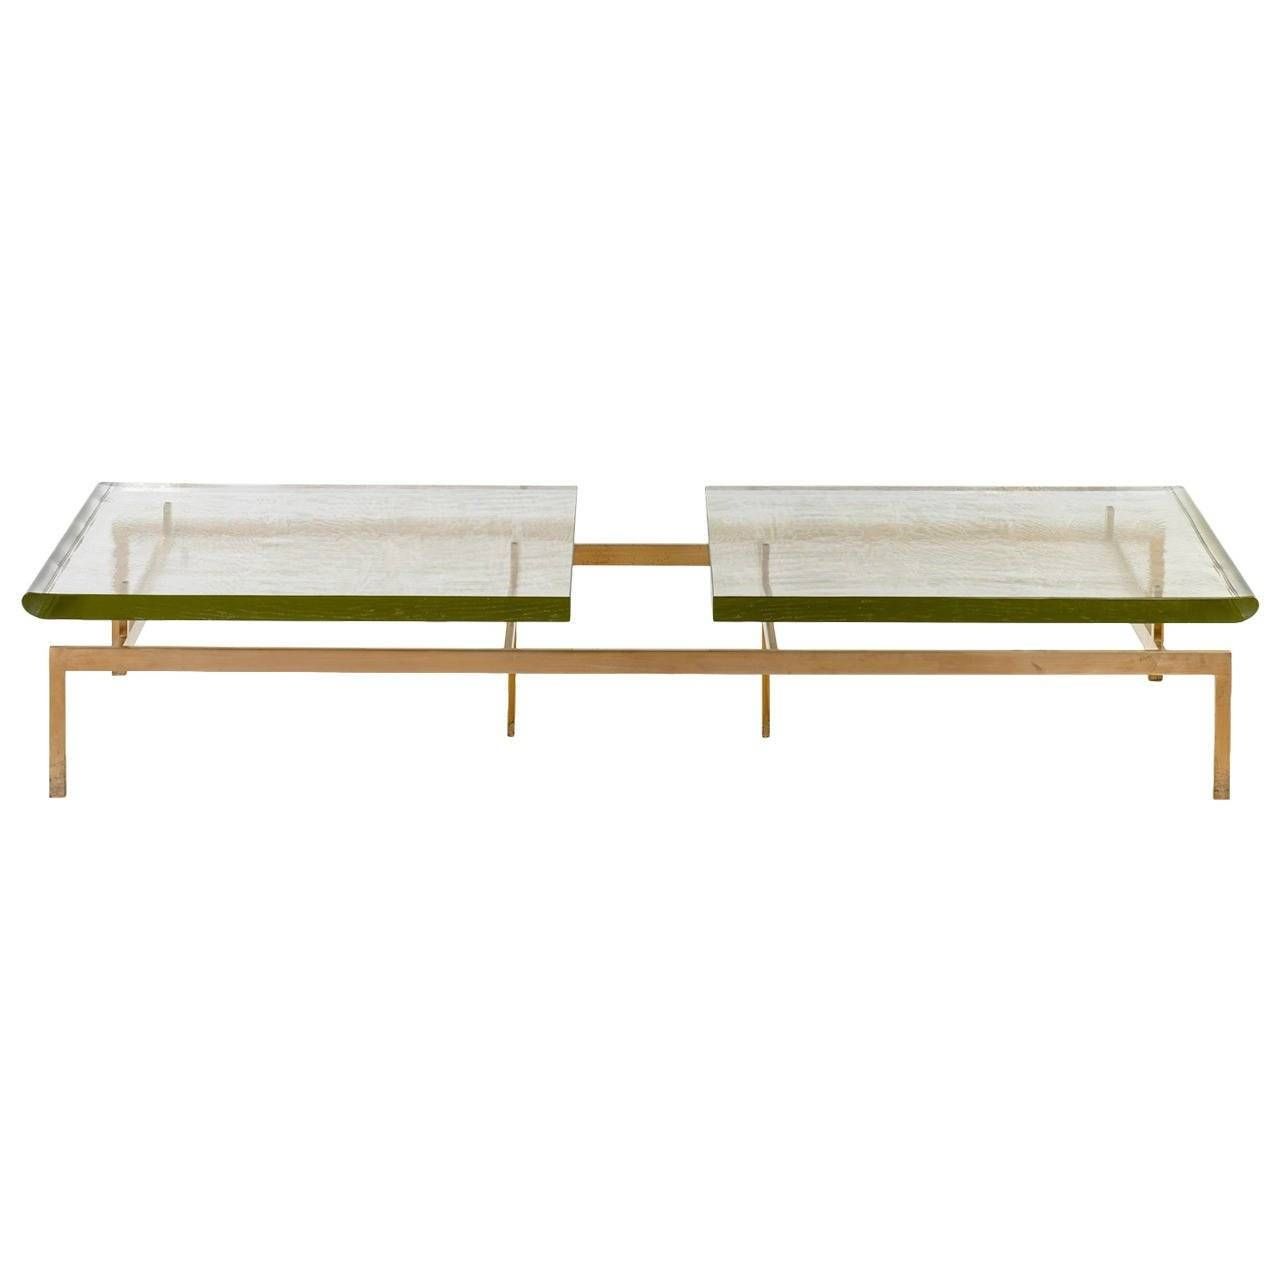 Duran Coffee Table With Thick Pyrex Glass Top And Silicon Bronze Regarding Bronze And Glass Coffee Tables (View 27 of 30)